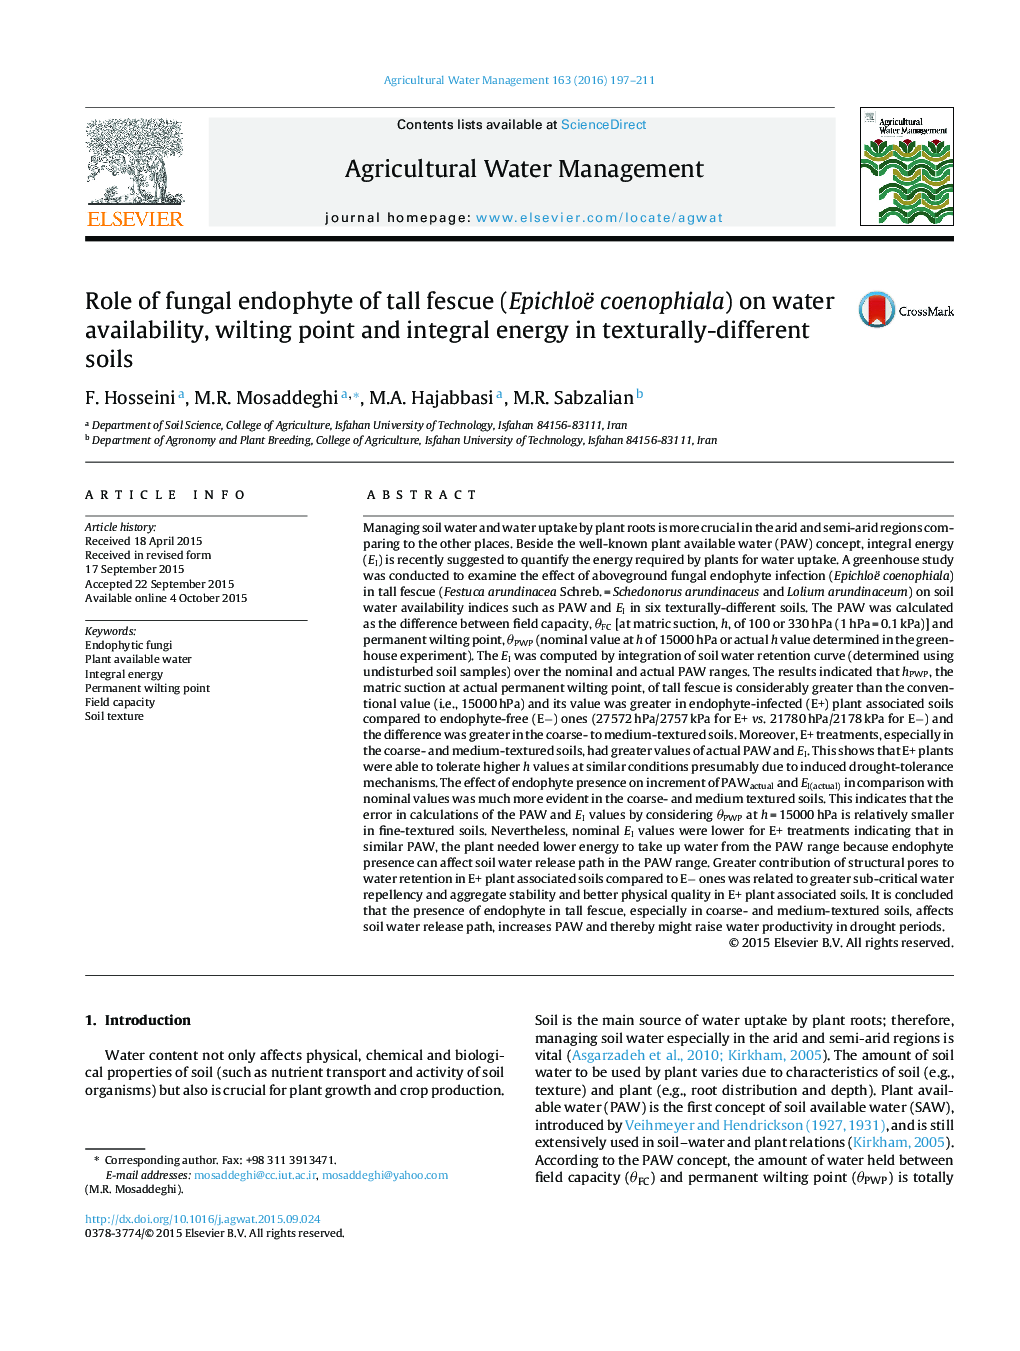 Role of fungal endophyte of tall fescue (Epichloë coenophiala) on water availability, wilting point and integral energy in texturally-different soils